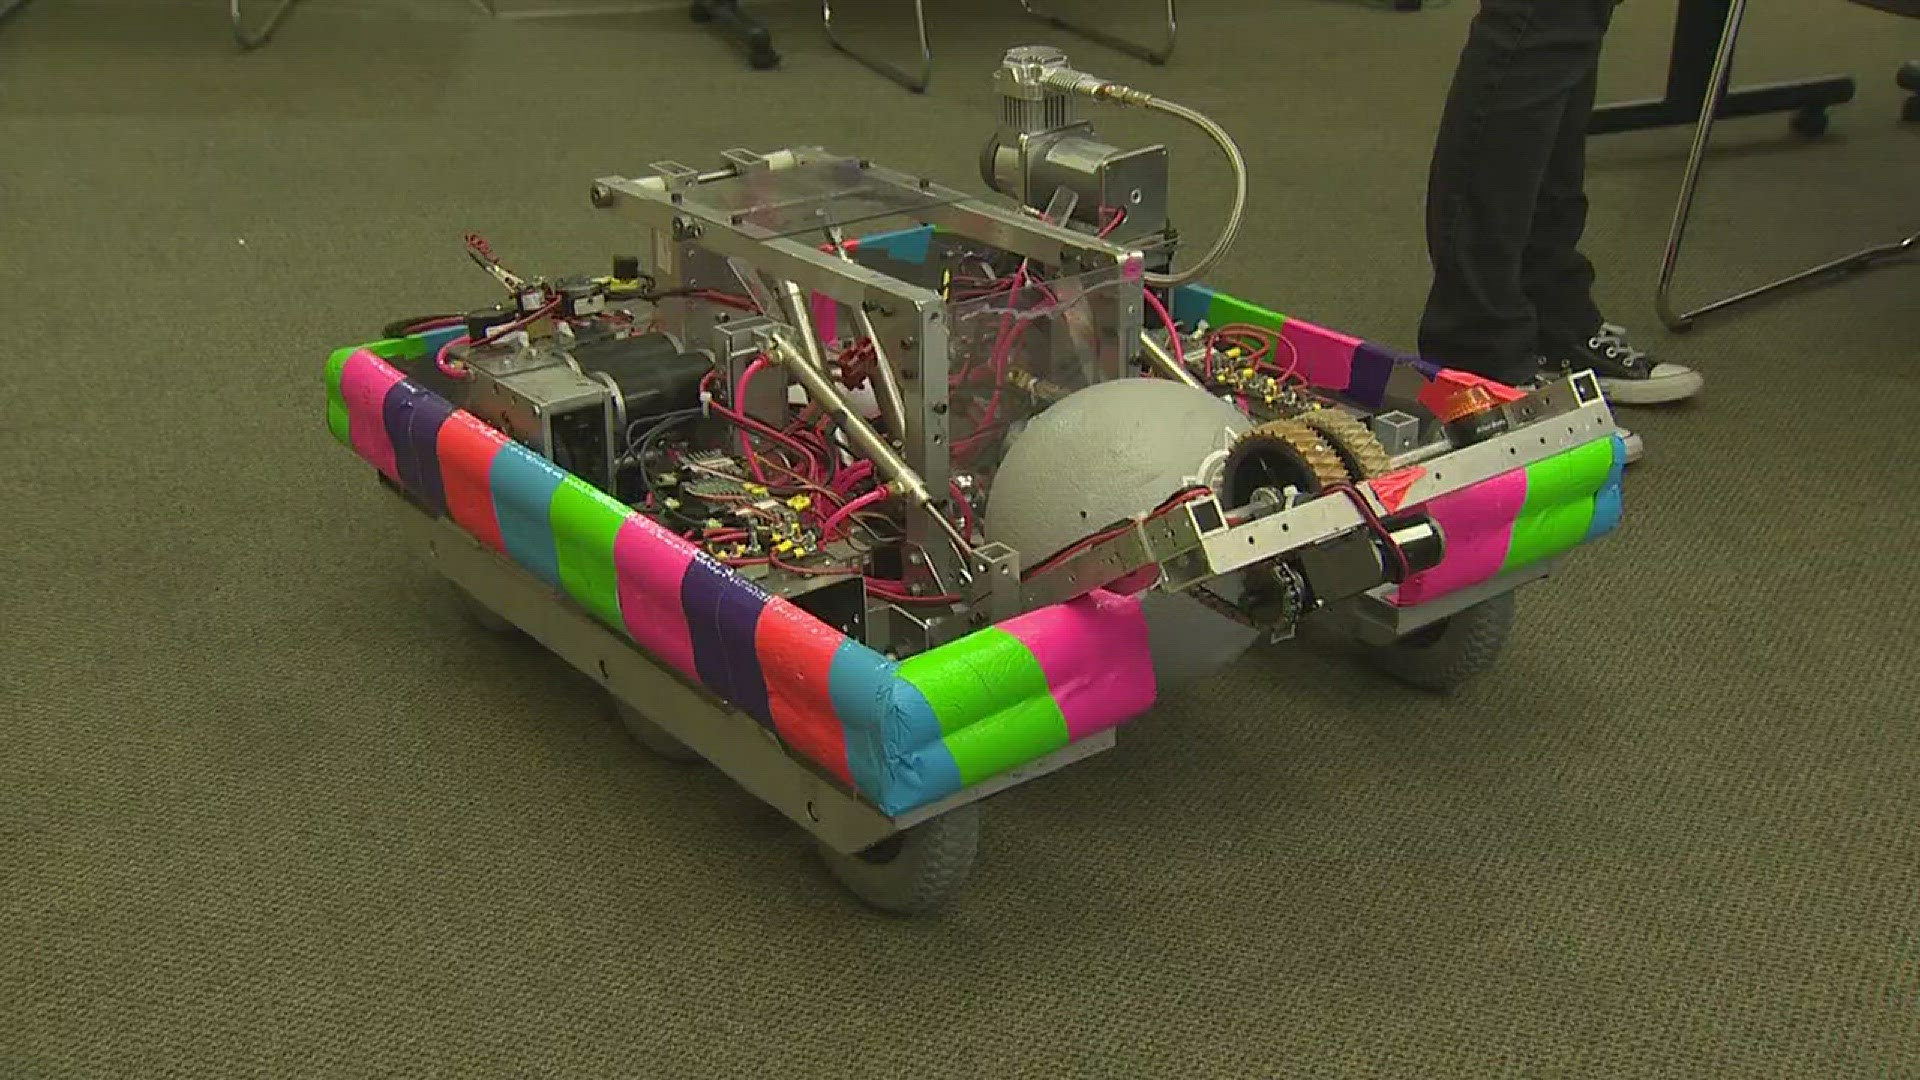 They have national sponsors, more than a dozen awards and enough brainpower to build and battle it out with robots. Austin's "lady cans" robotics team is headed to an international competition.